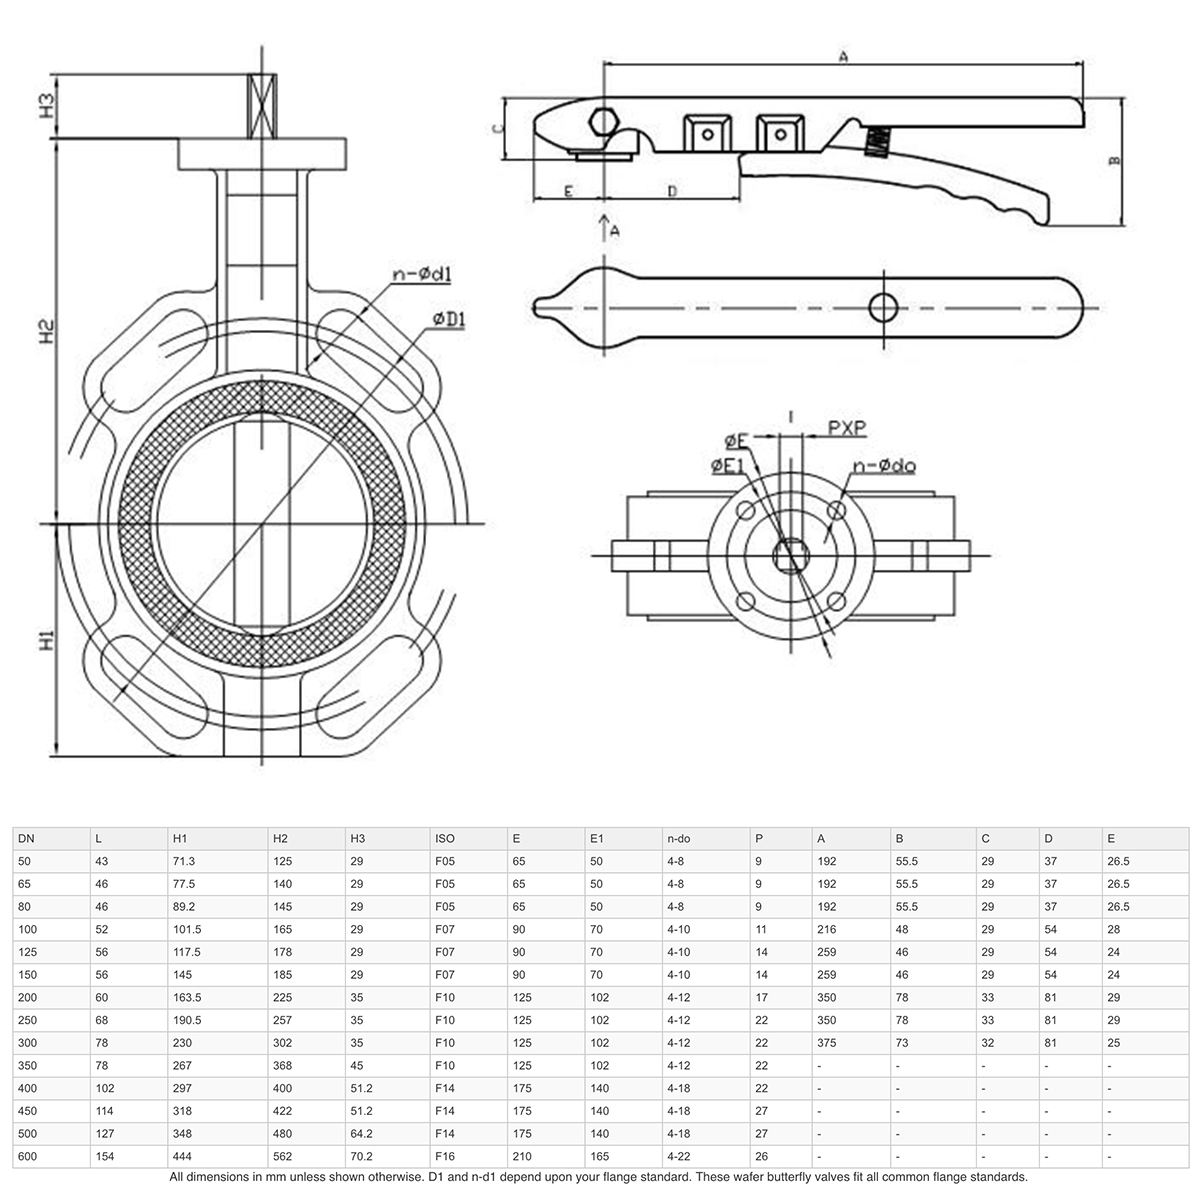 Dimensions - GO Butterfly Valve Manual CI Body 316 SS Disc EPDM Liner 2" to 24" BFD Range